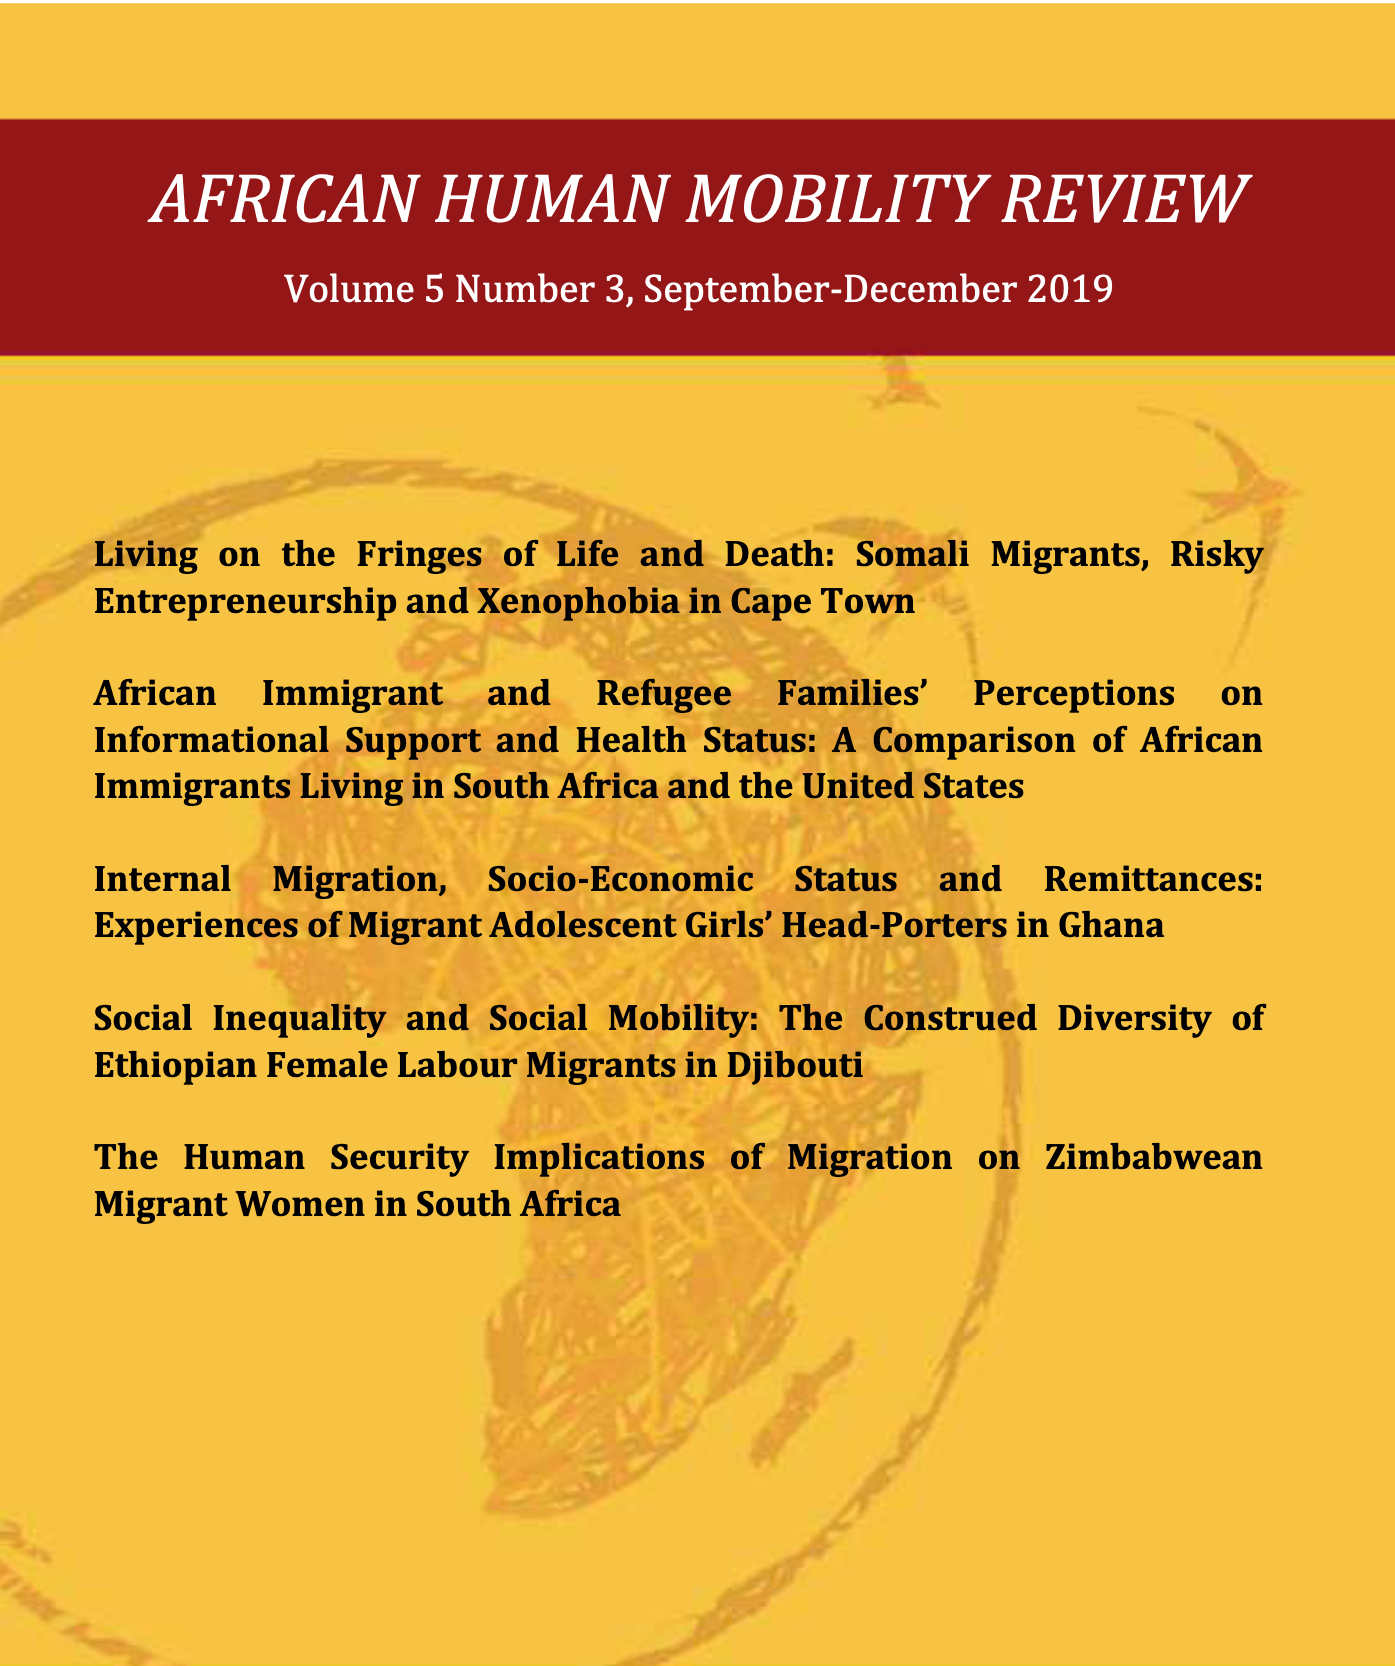 					View Vol. 5 No. 3 (2019): AFRICAN HUMAN MOBILITY REVIEW
				